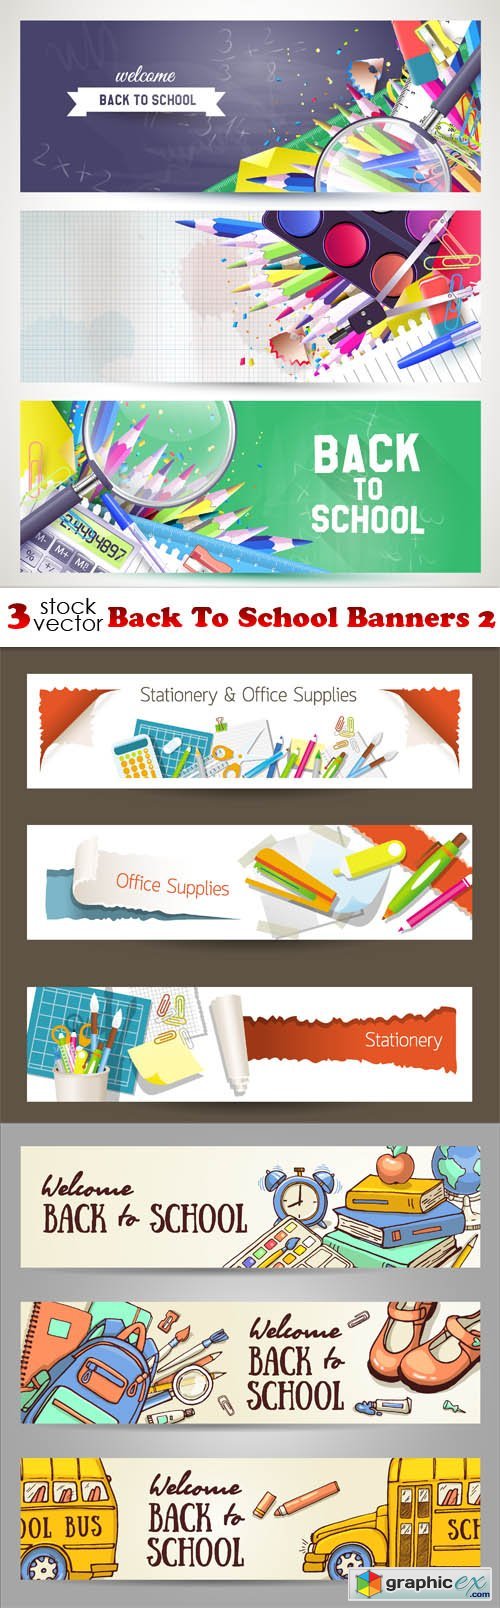 Back To School Banners 2